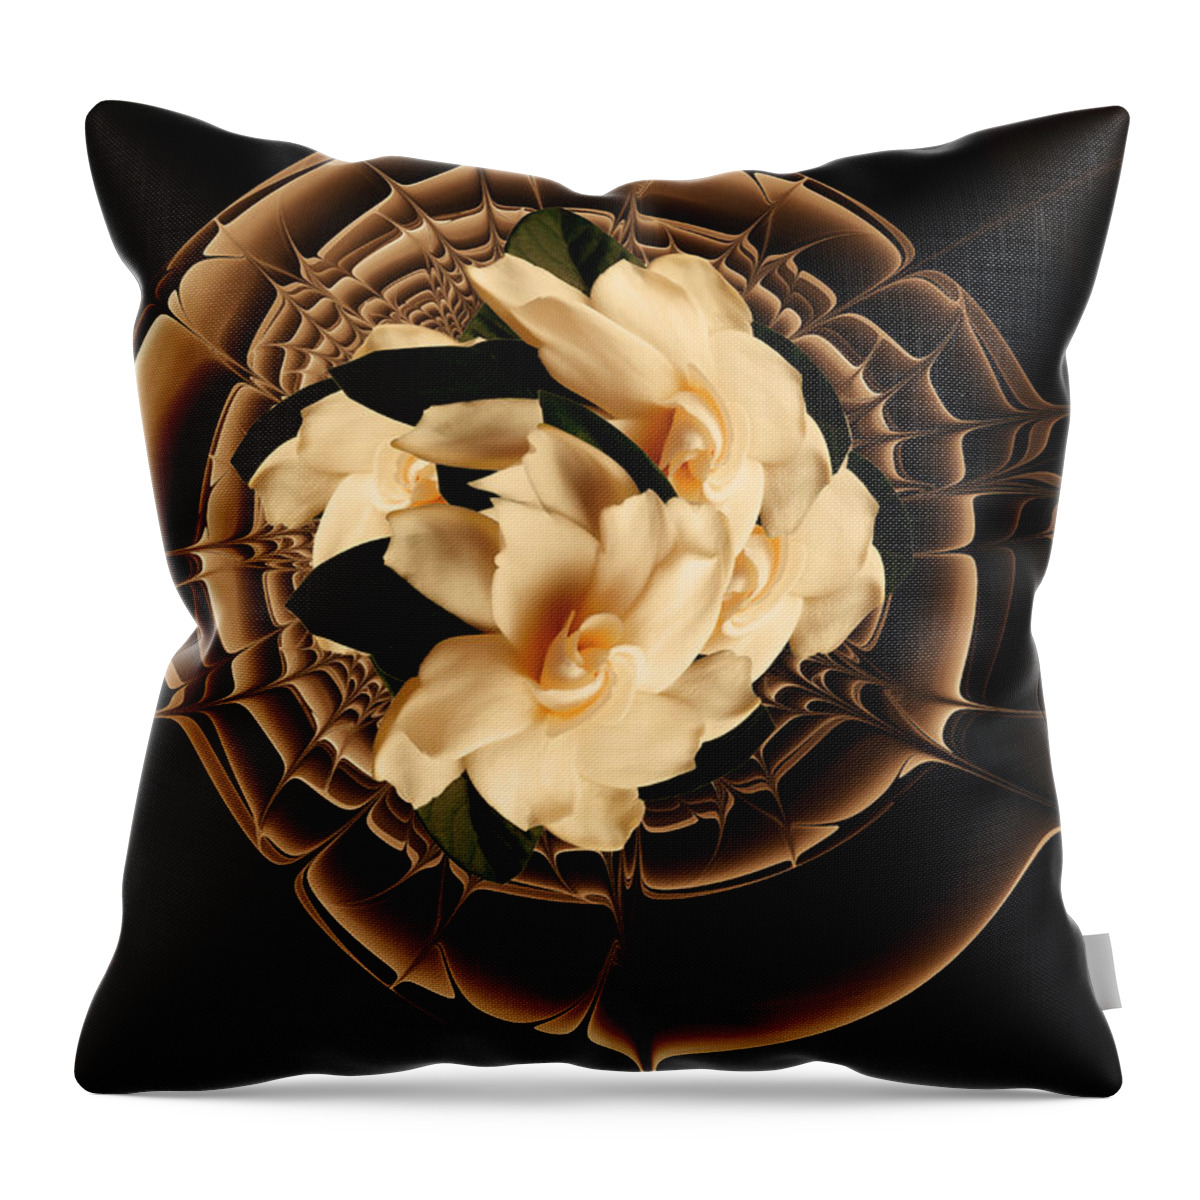 Flower Throw Pillow featuring the mixed media Flowers and Chocolate by Georgiana Romanovna